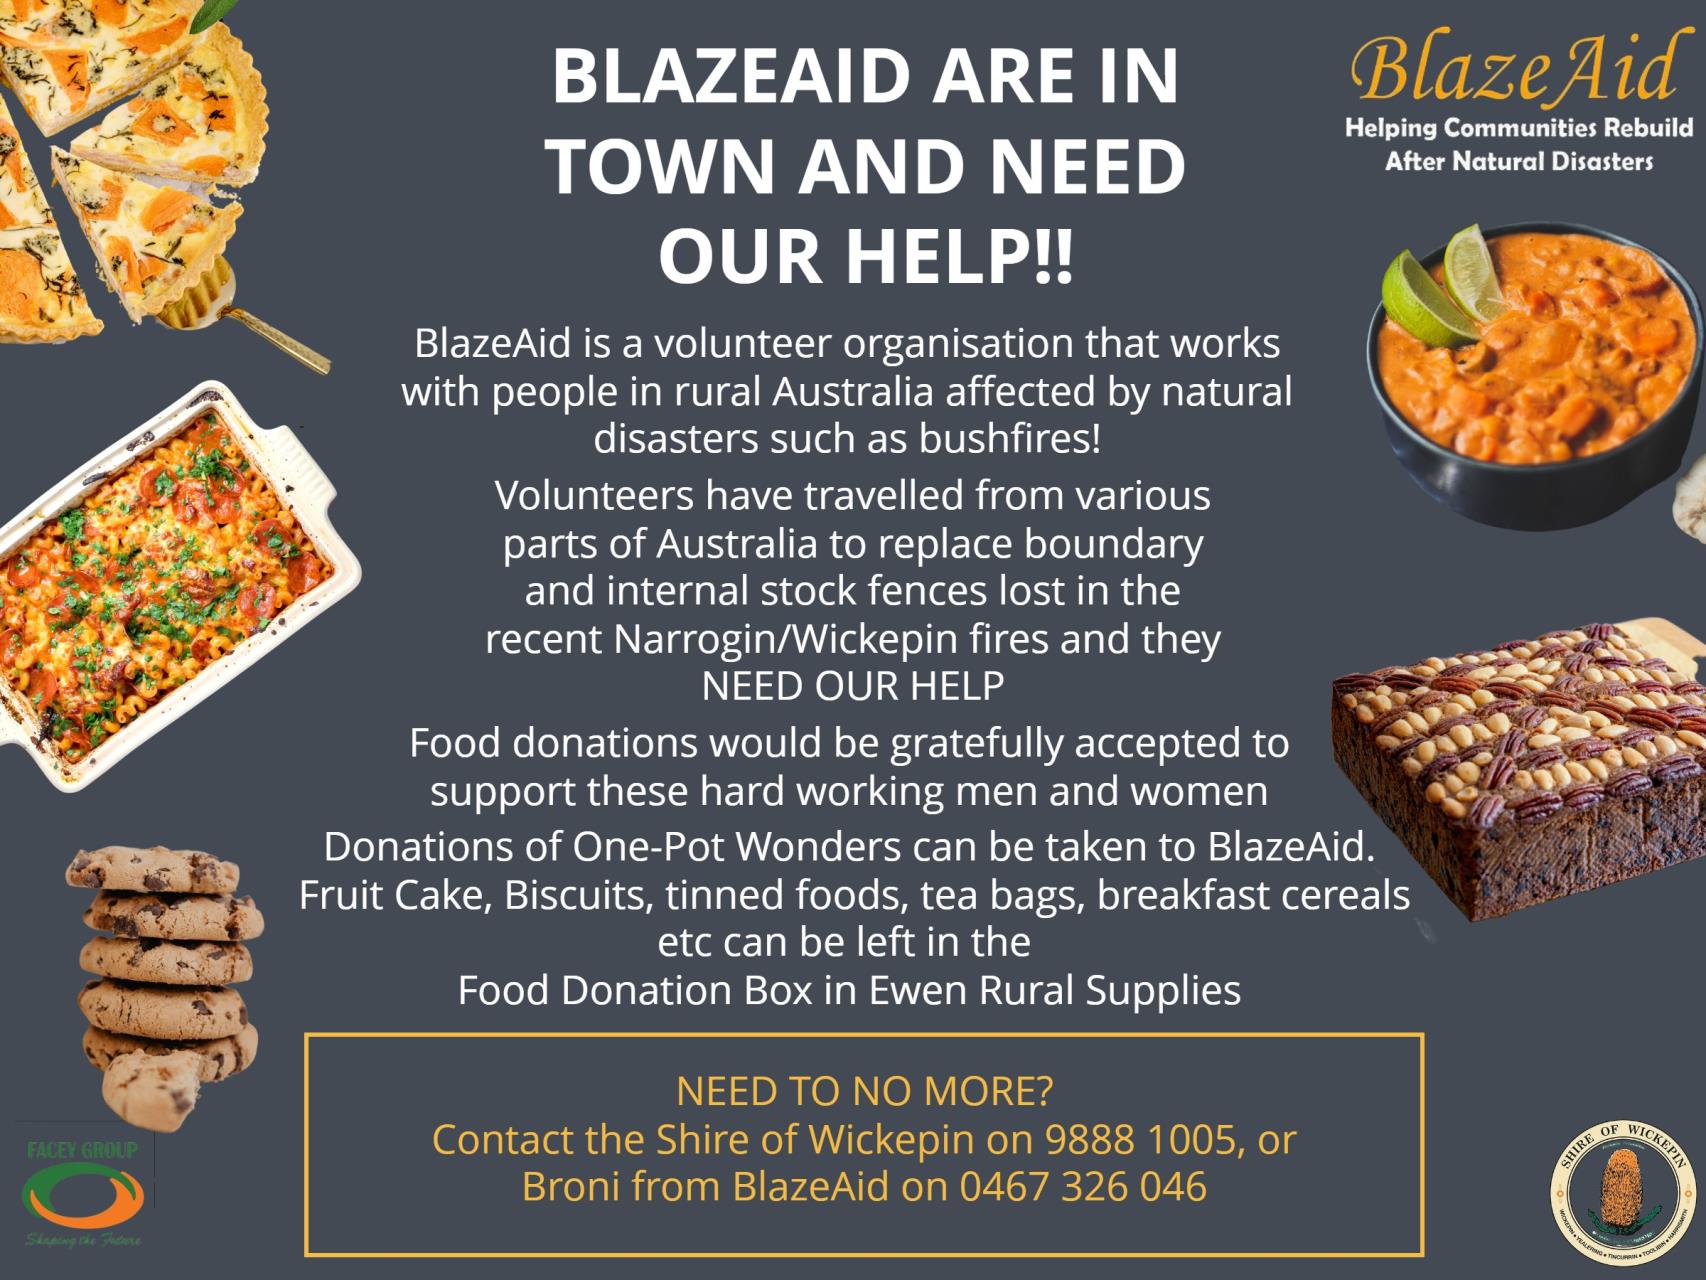 BLAZEAID ARE IN TOWN!